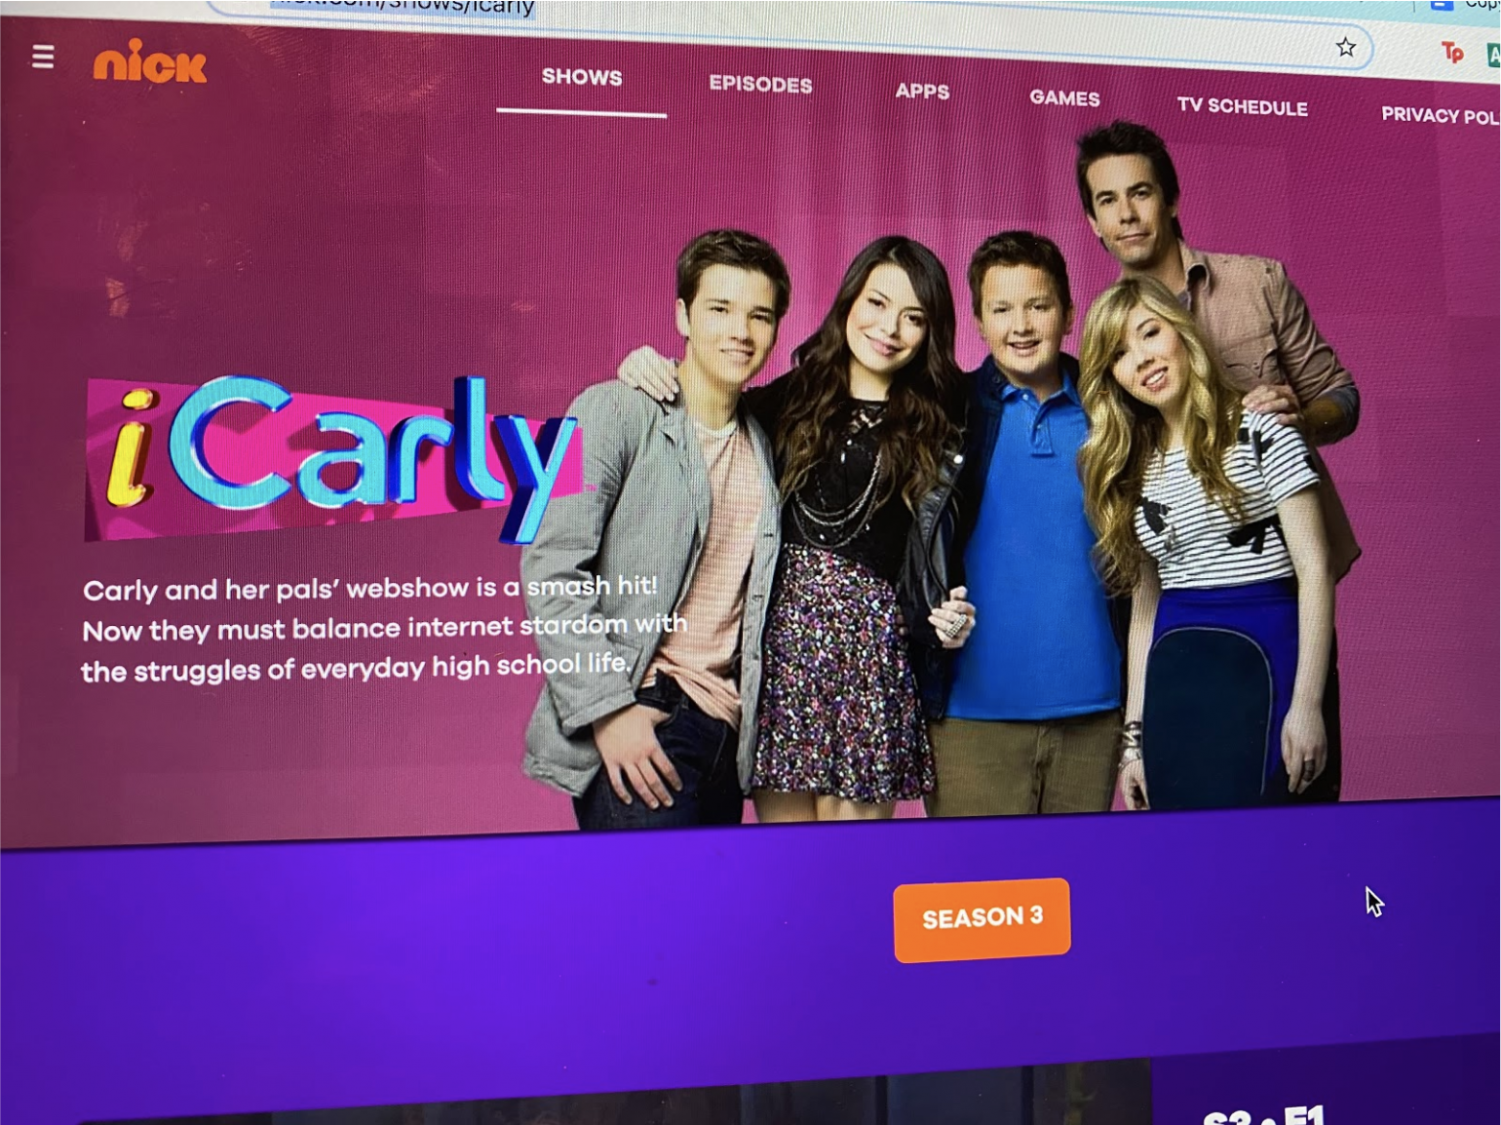 Nickelodeon show iCarly emerges on Netflix, bringing excitement to